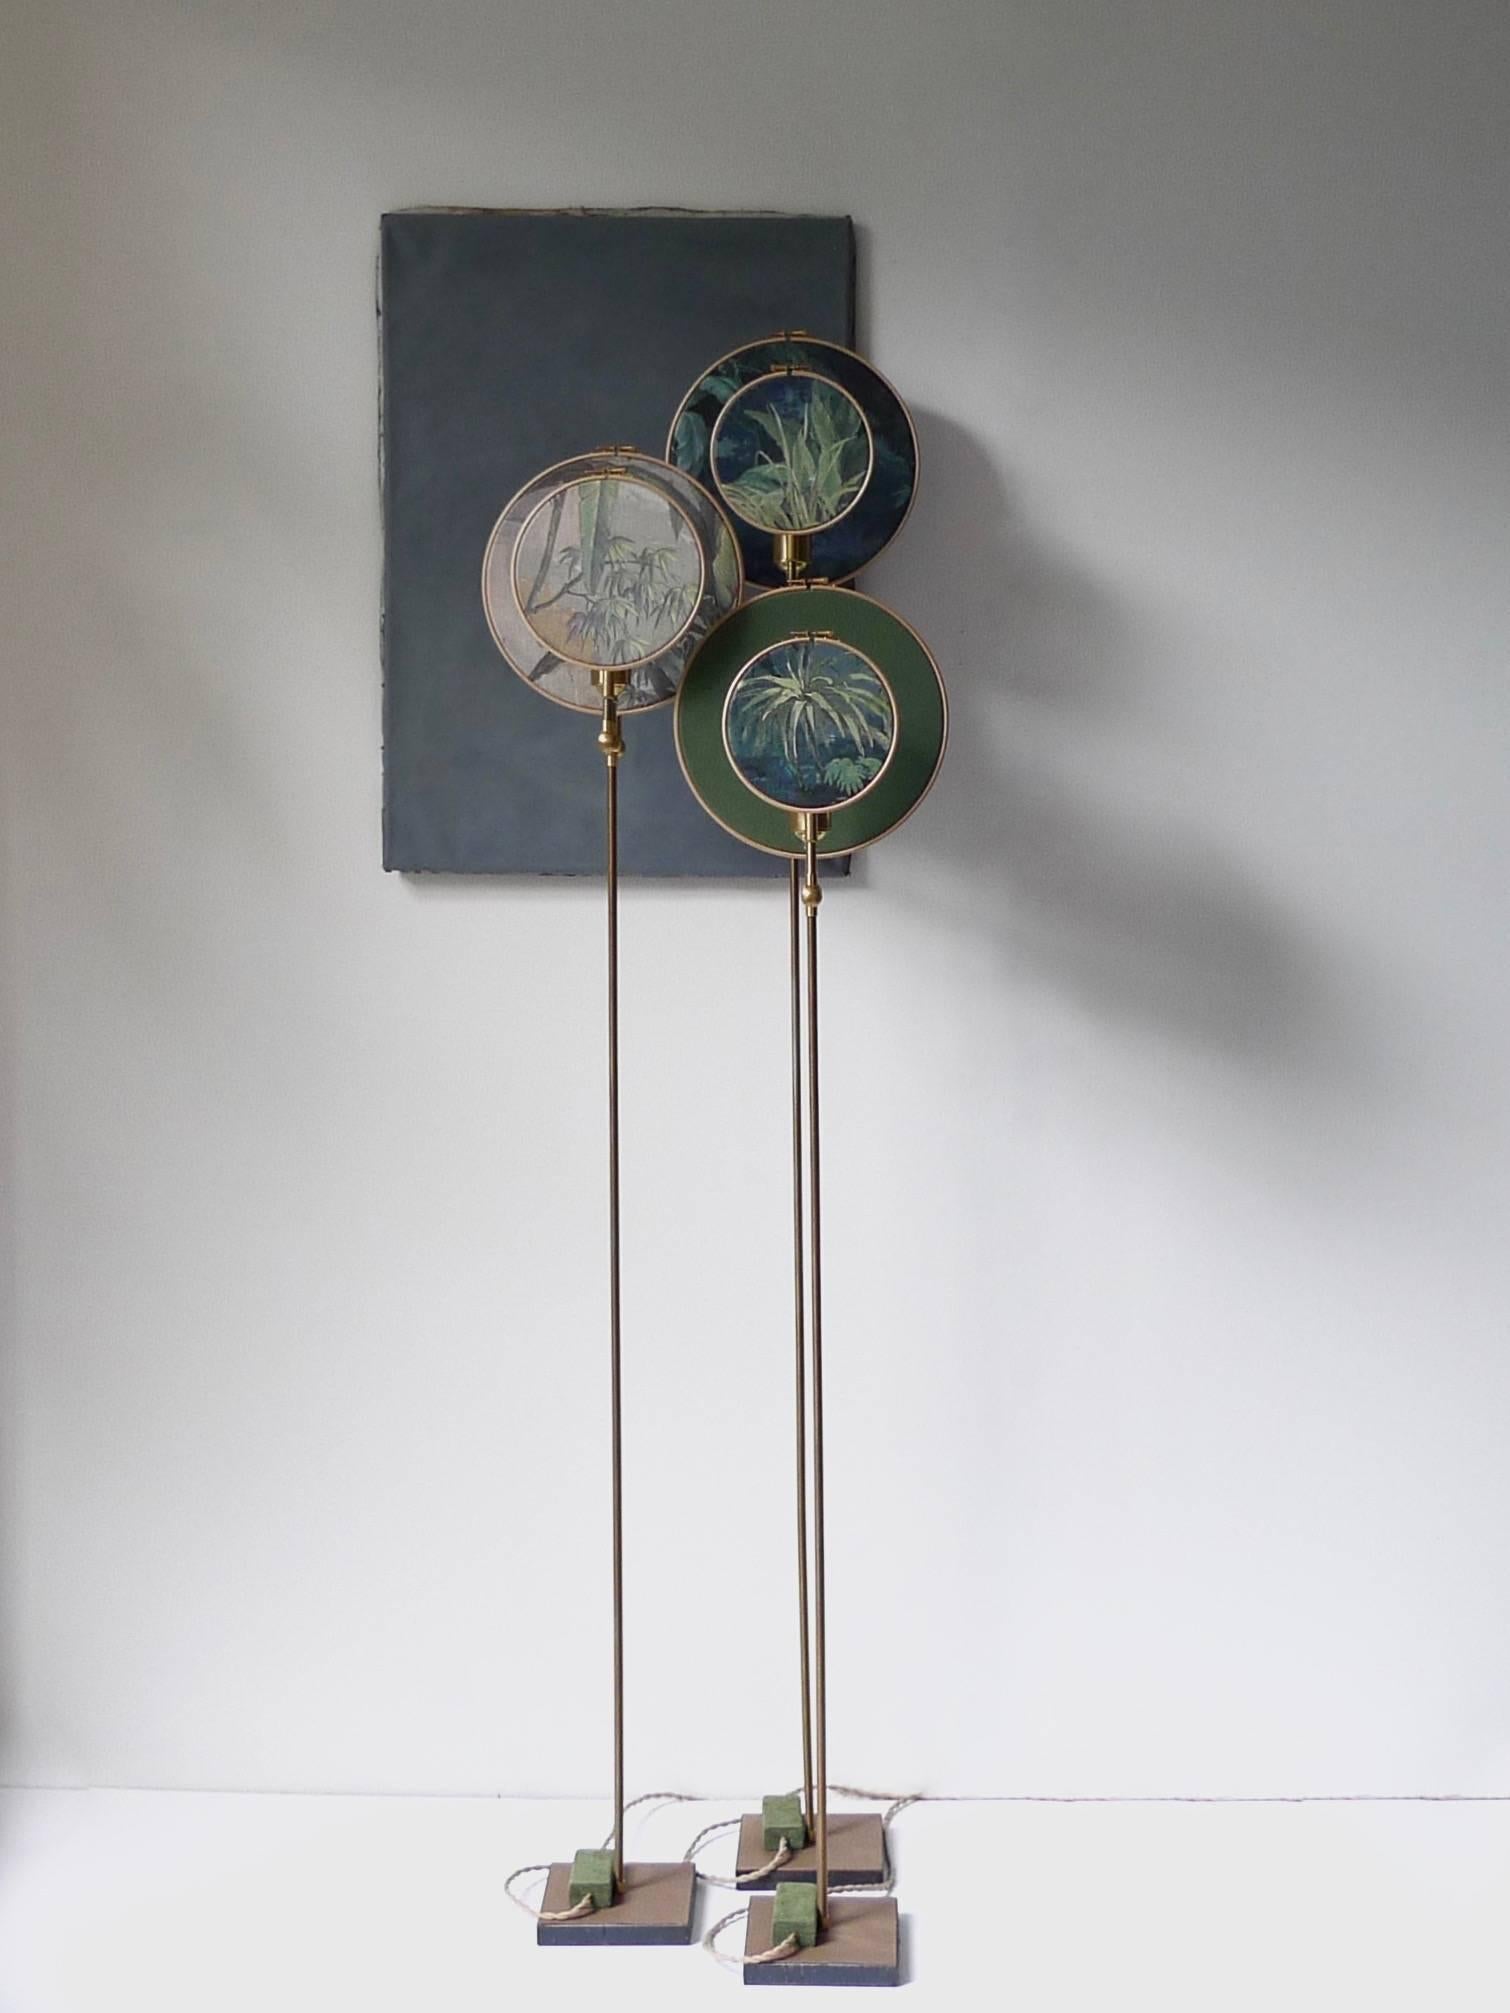 Light object, floor lamp, circle blue grey
Handmade in brass, leather, wood and hand printed and painted linen.
A dimmer is inlaid with leather
Dimensions: H 160 x W 27 x D 16 cm
The design artwork is meticulously handcrafted in a limited